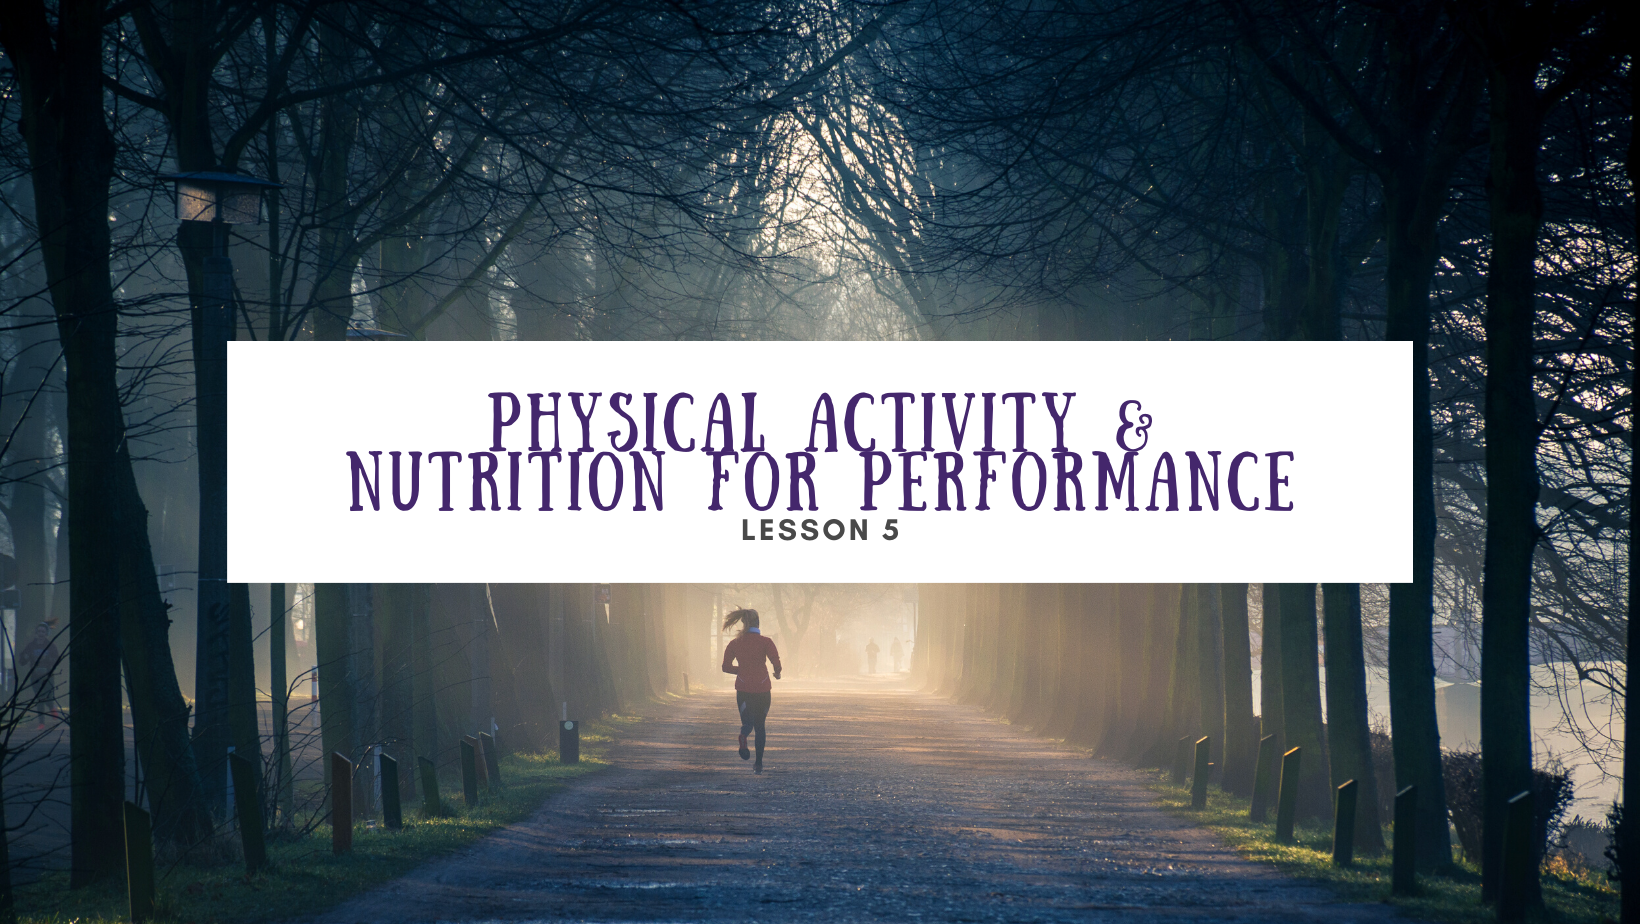 Lesson 5 Physical Activity & Nutrition for Performance